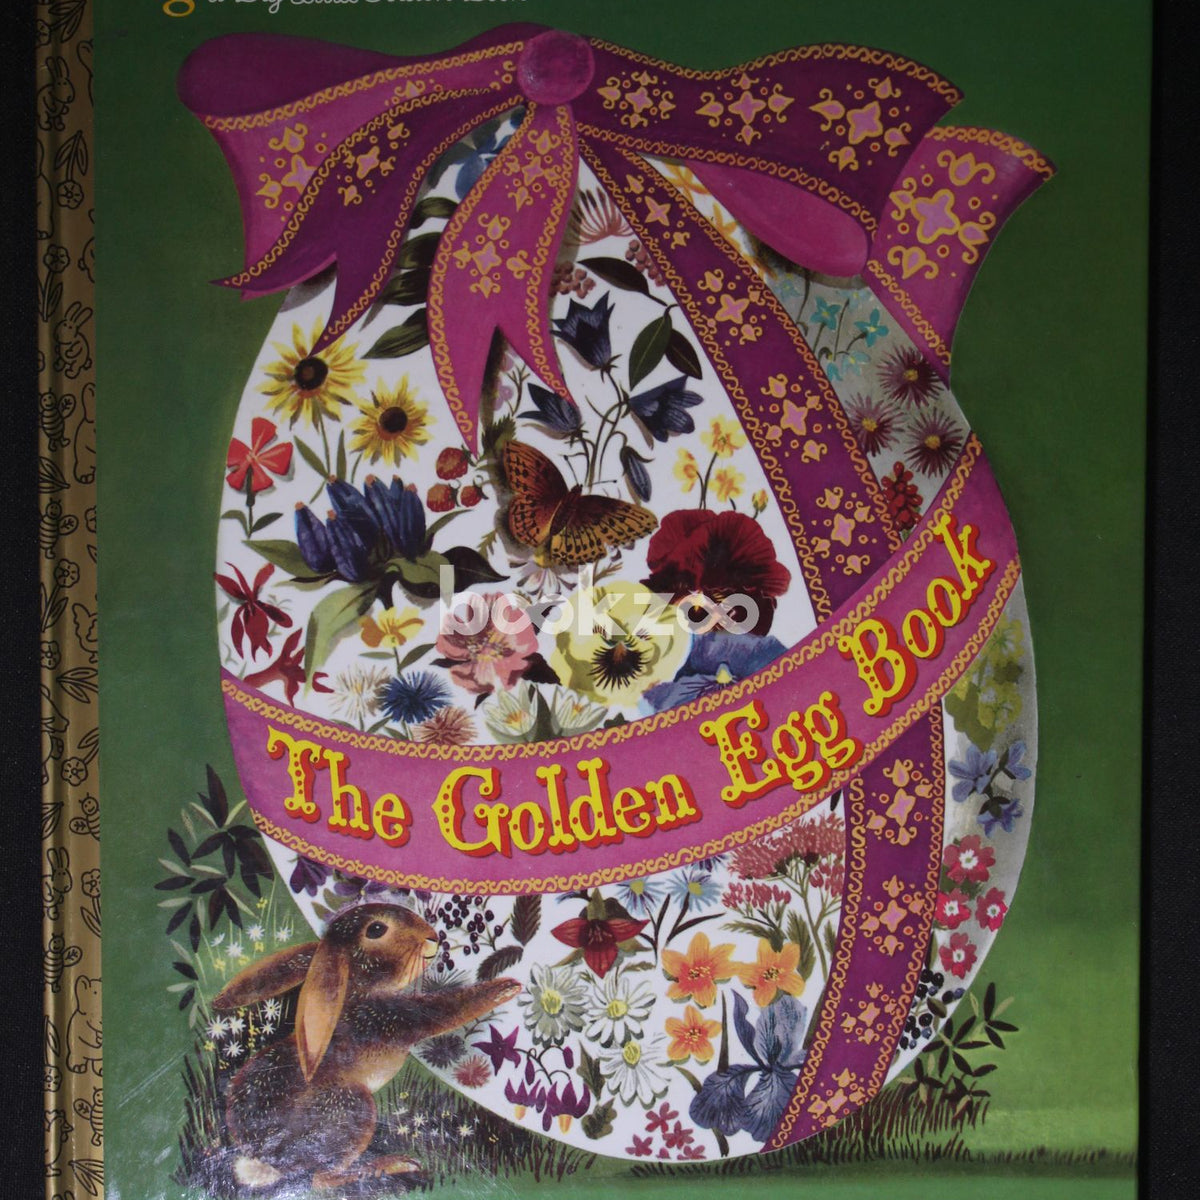 Buy The Golden Egg Book by Margaret Wise Brown at Online bookstore 